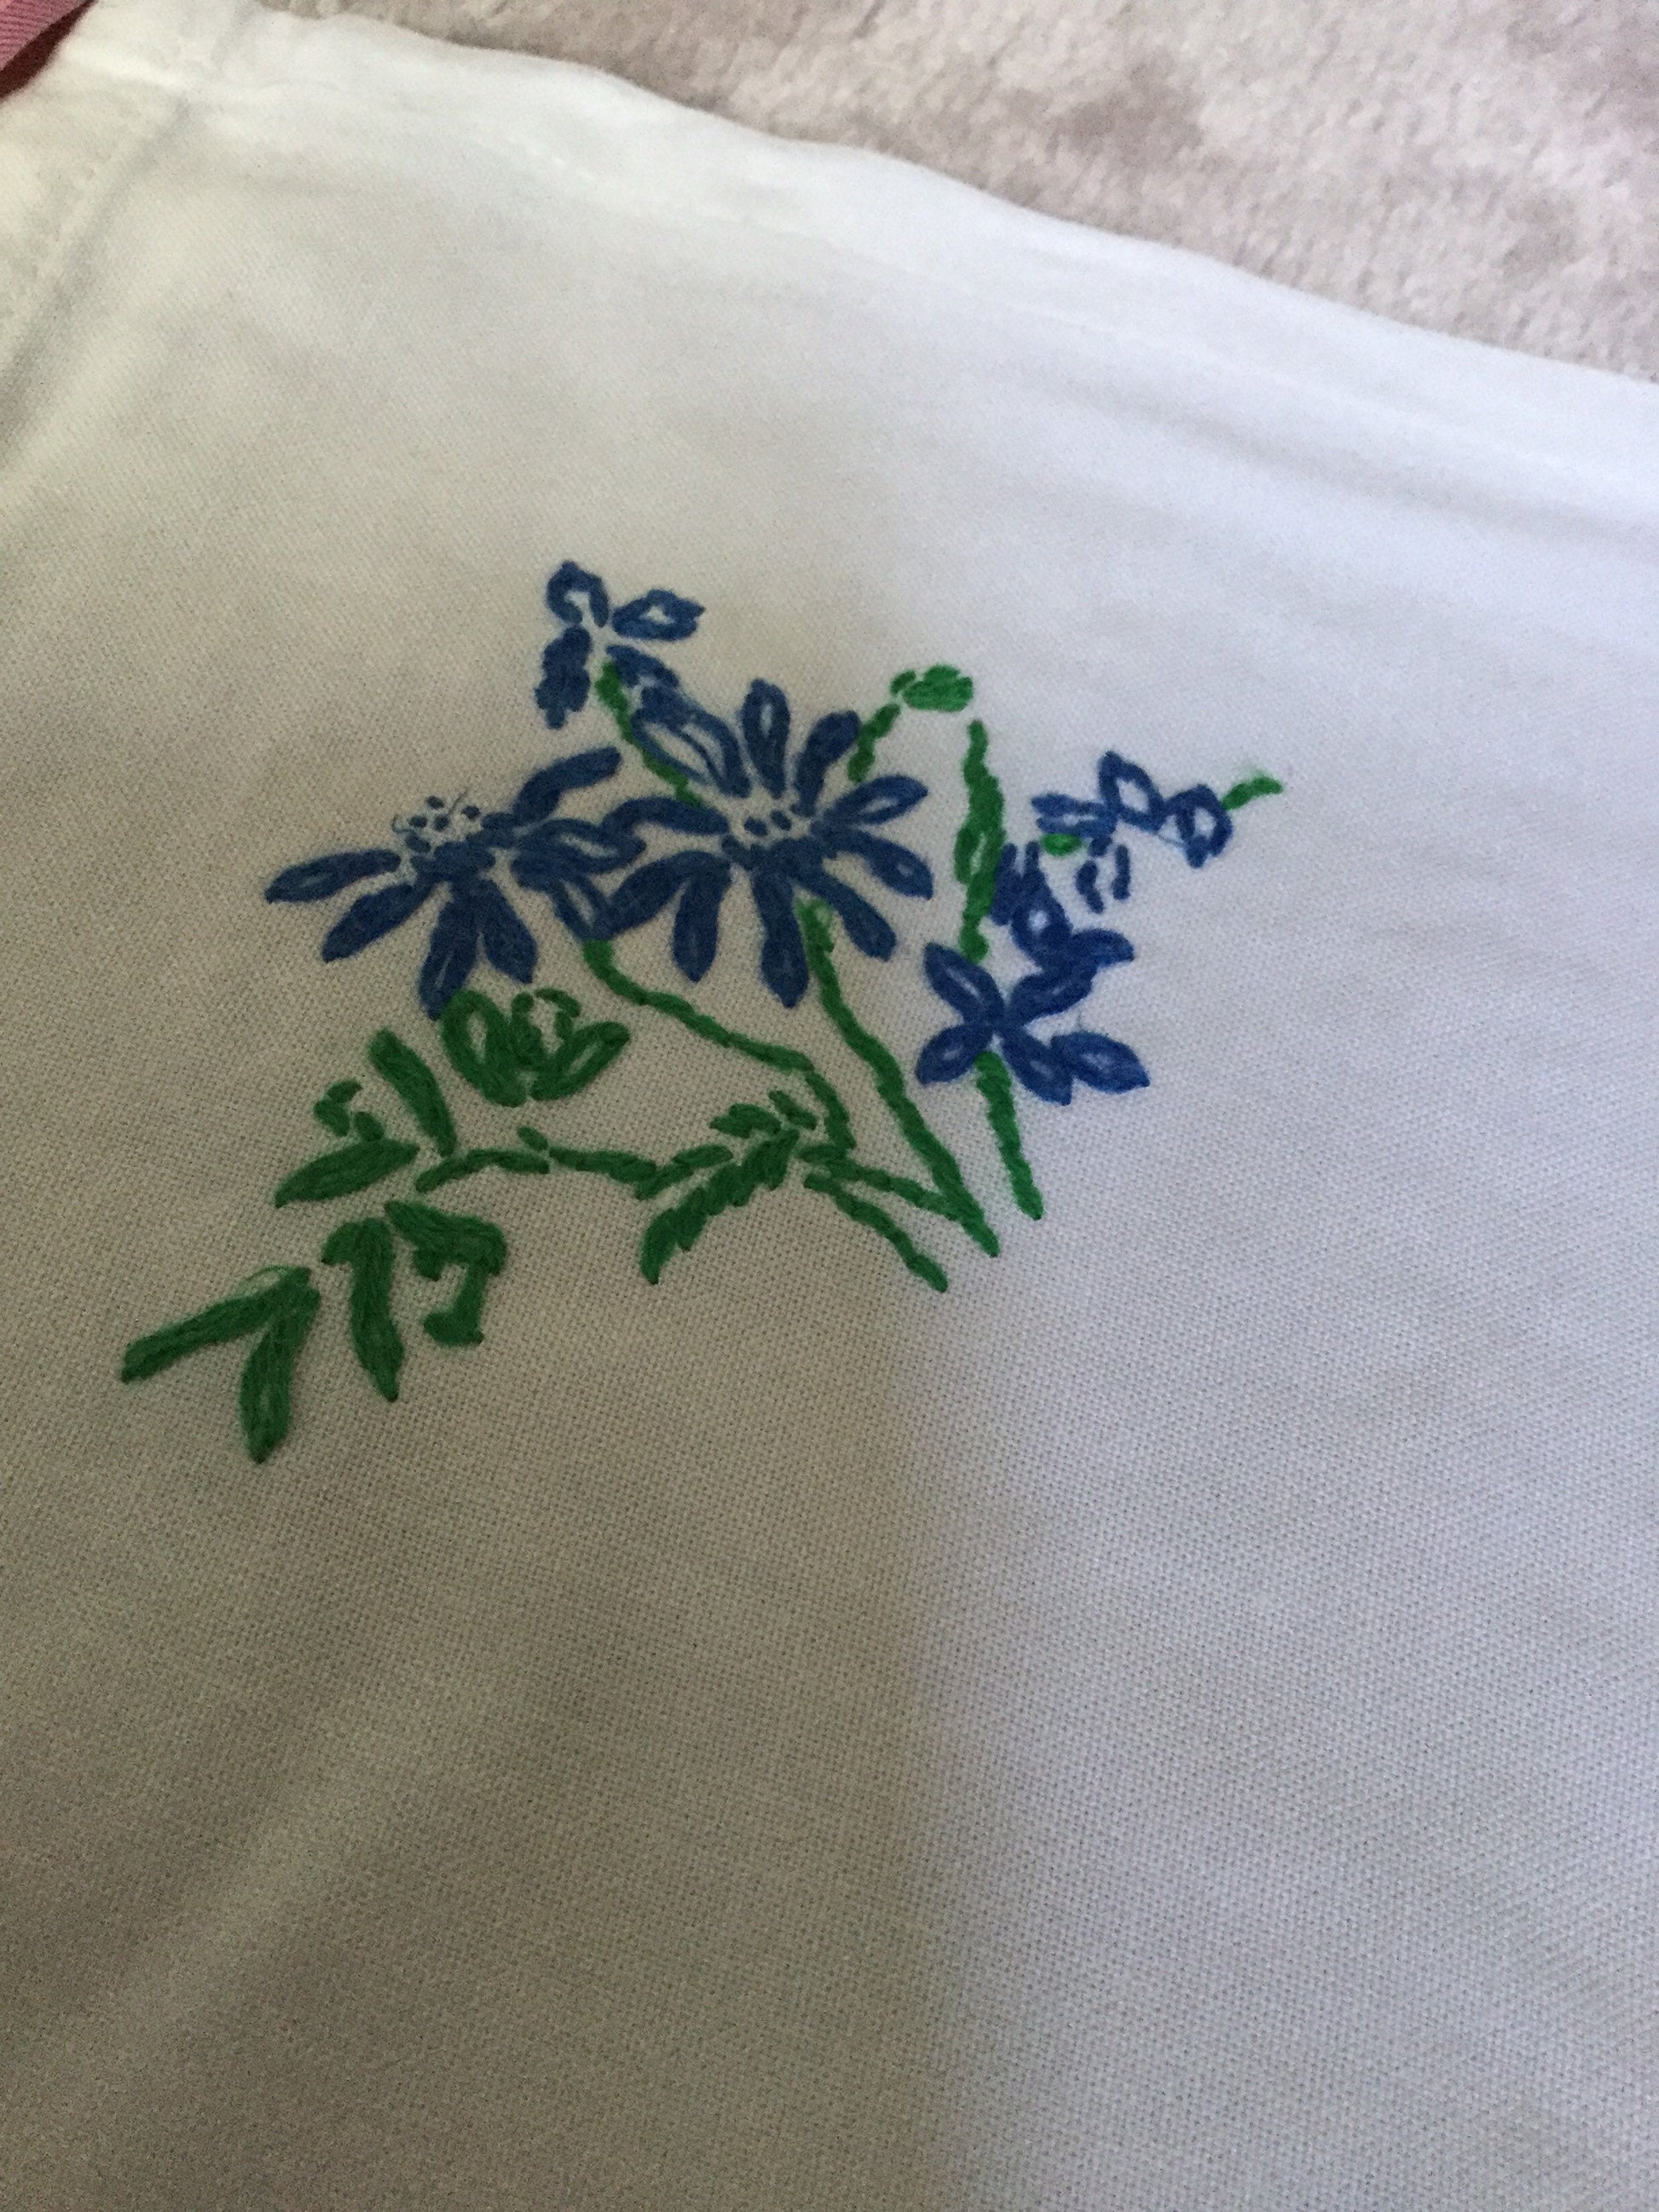 Vintage tray cloth of dressing table cloth pretty blue green embroidered flowers